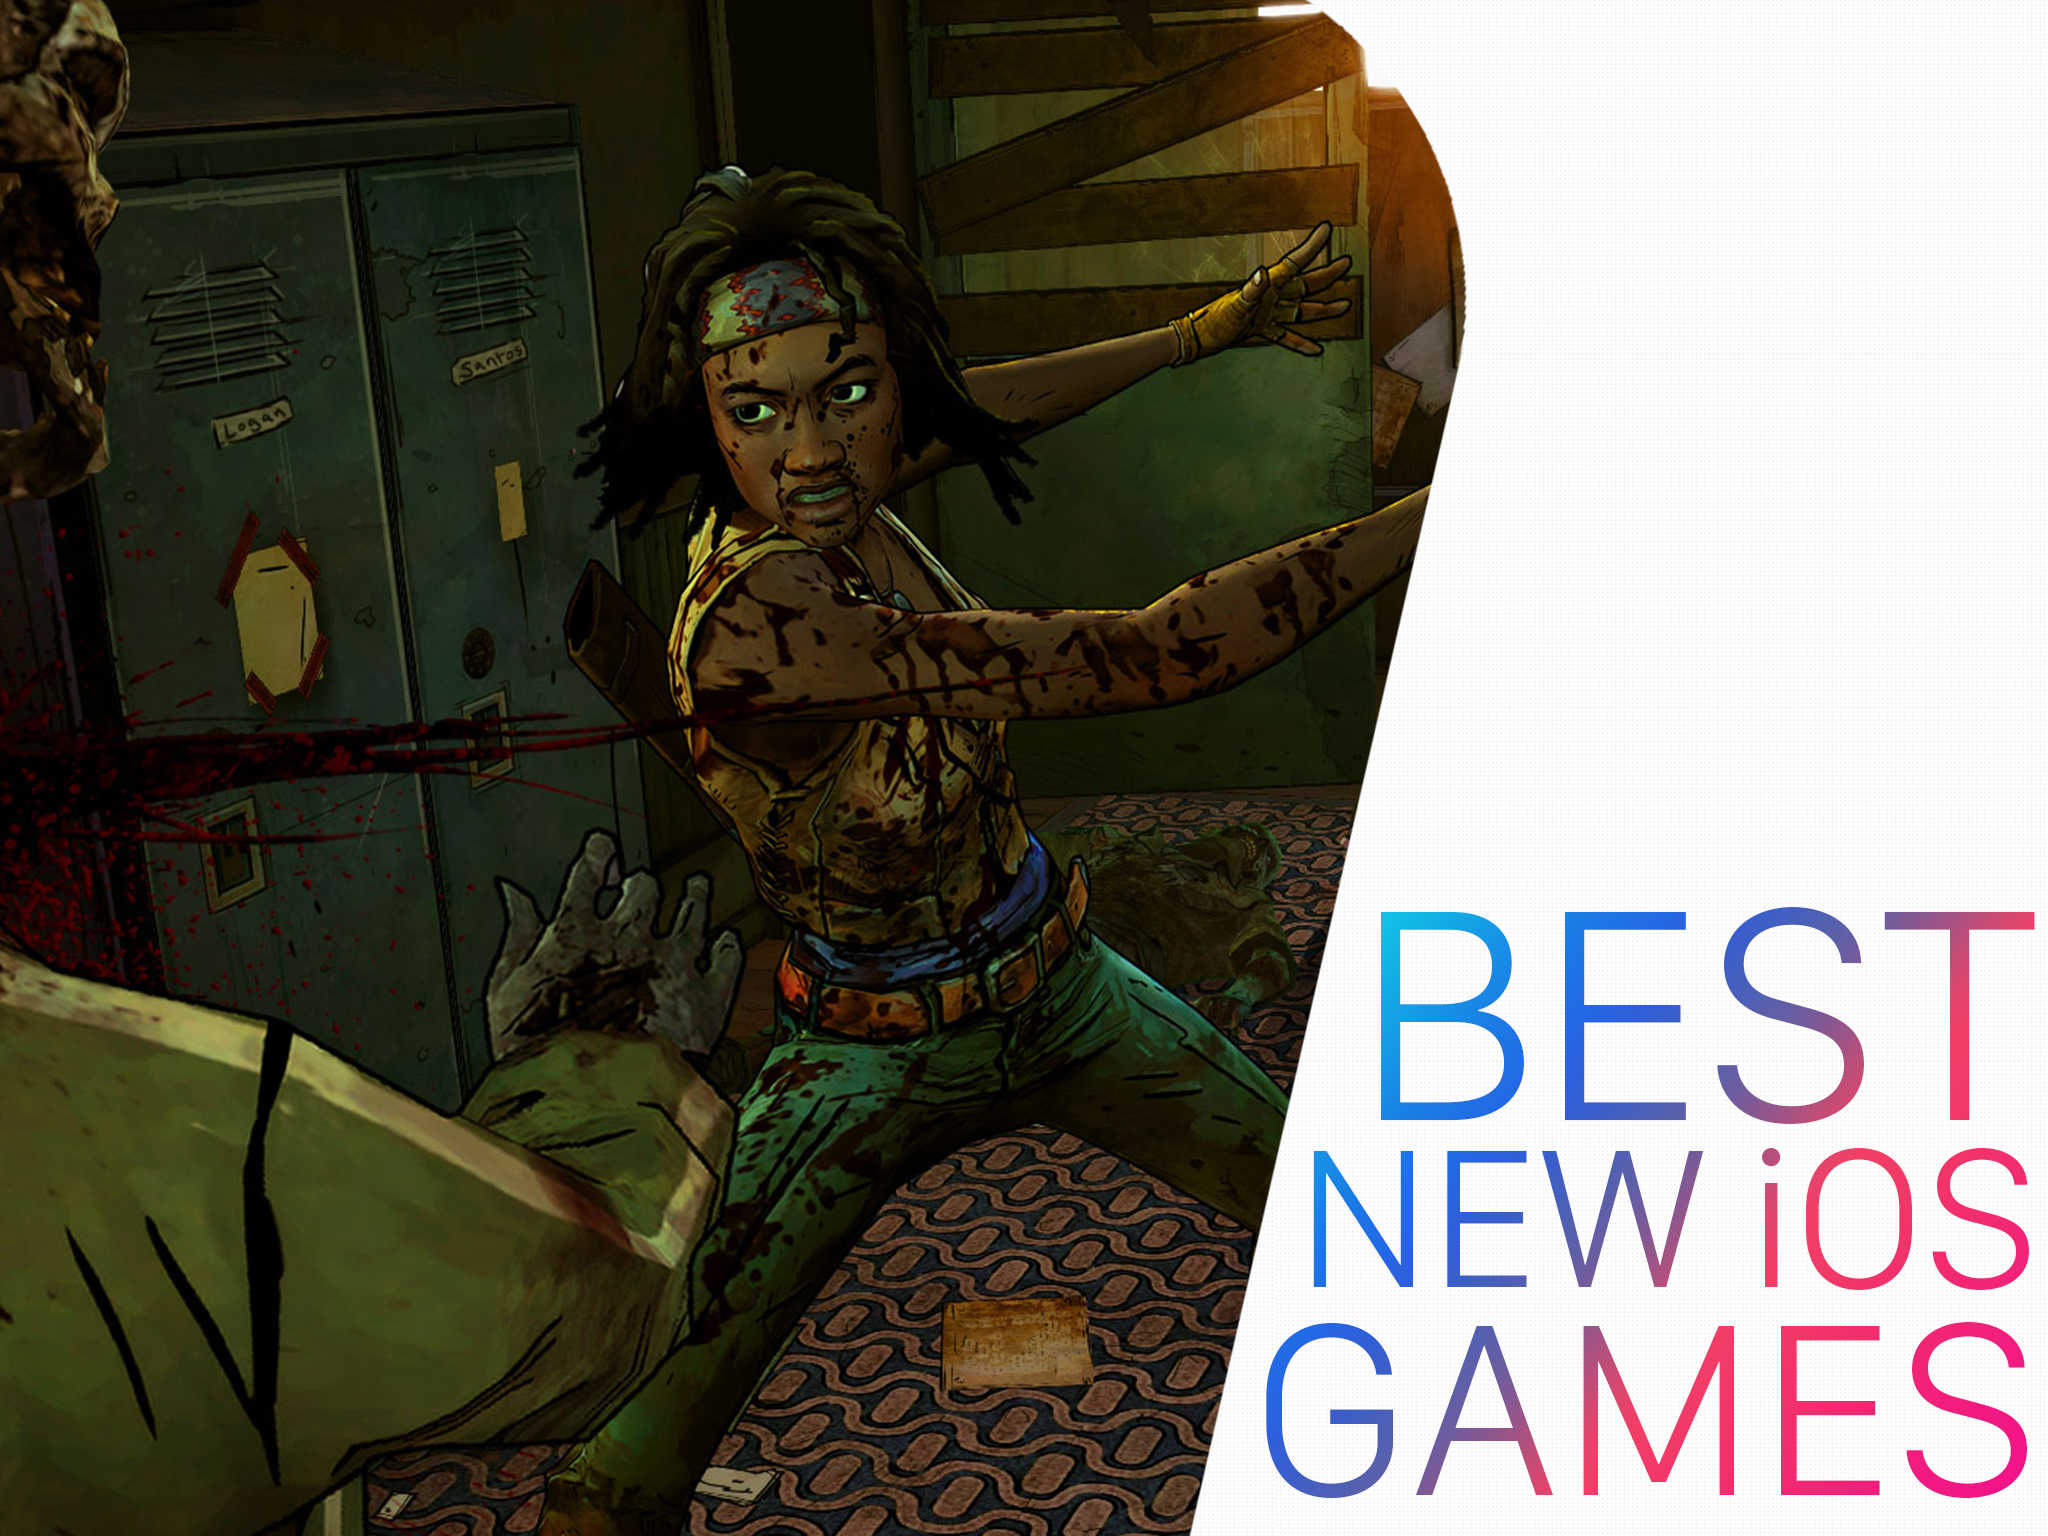 Best new iOS games February 2016